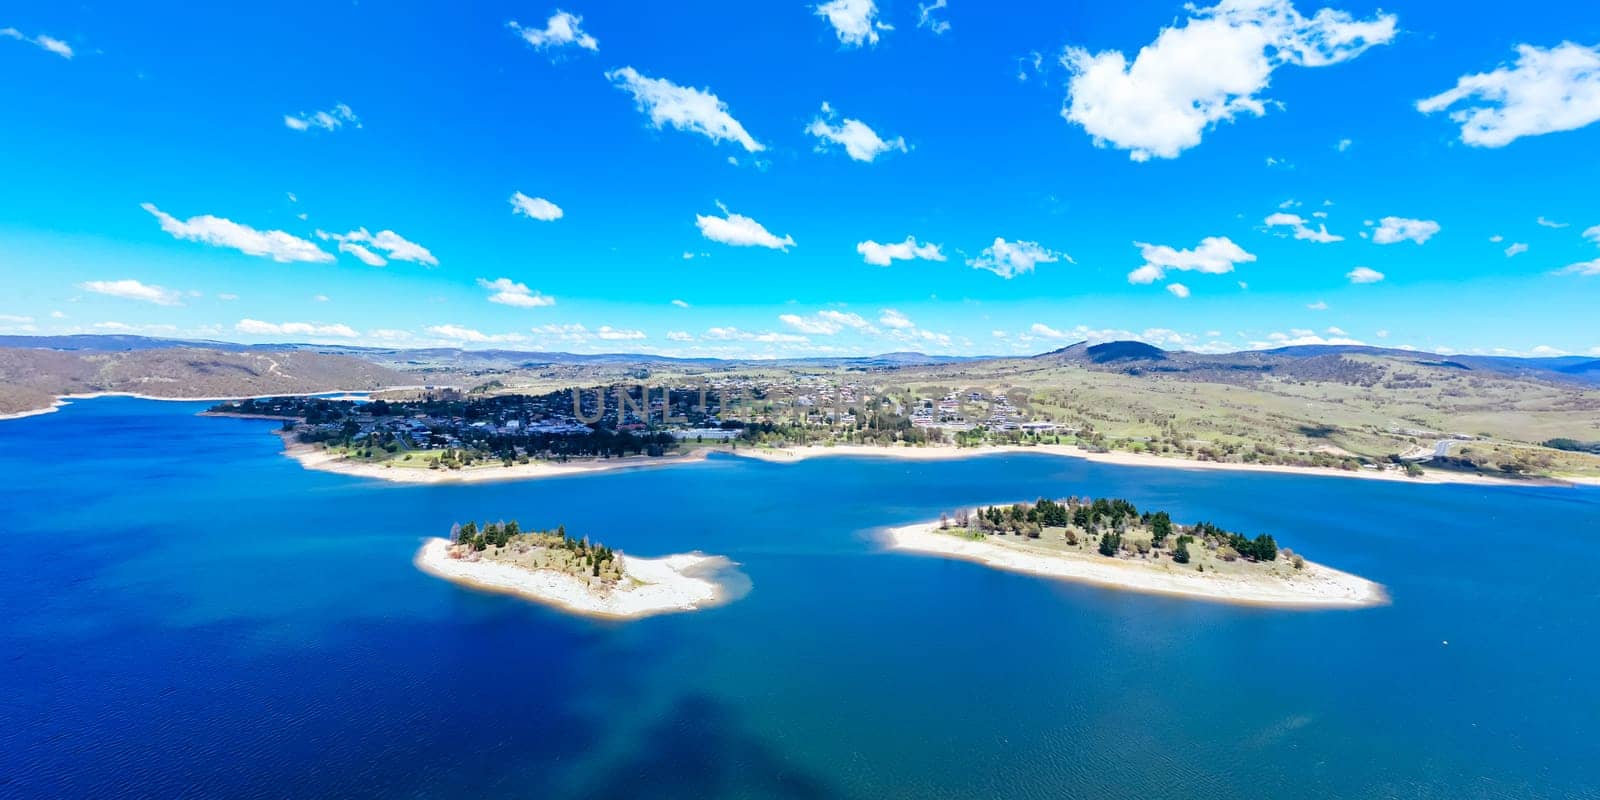 The view towards the town of Jindabyne over Lion and Cub Islands in Lake Jindabyne on a warm sunny summer's day in New South Wales, Australia